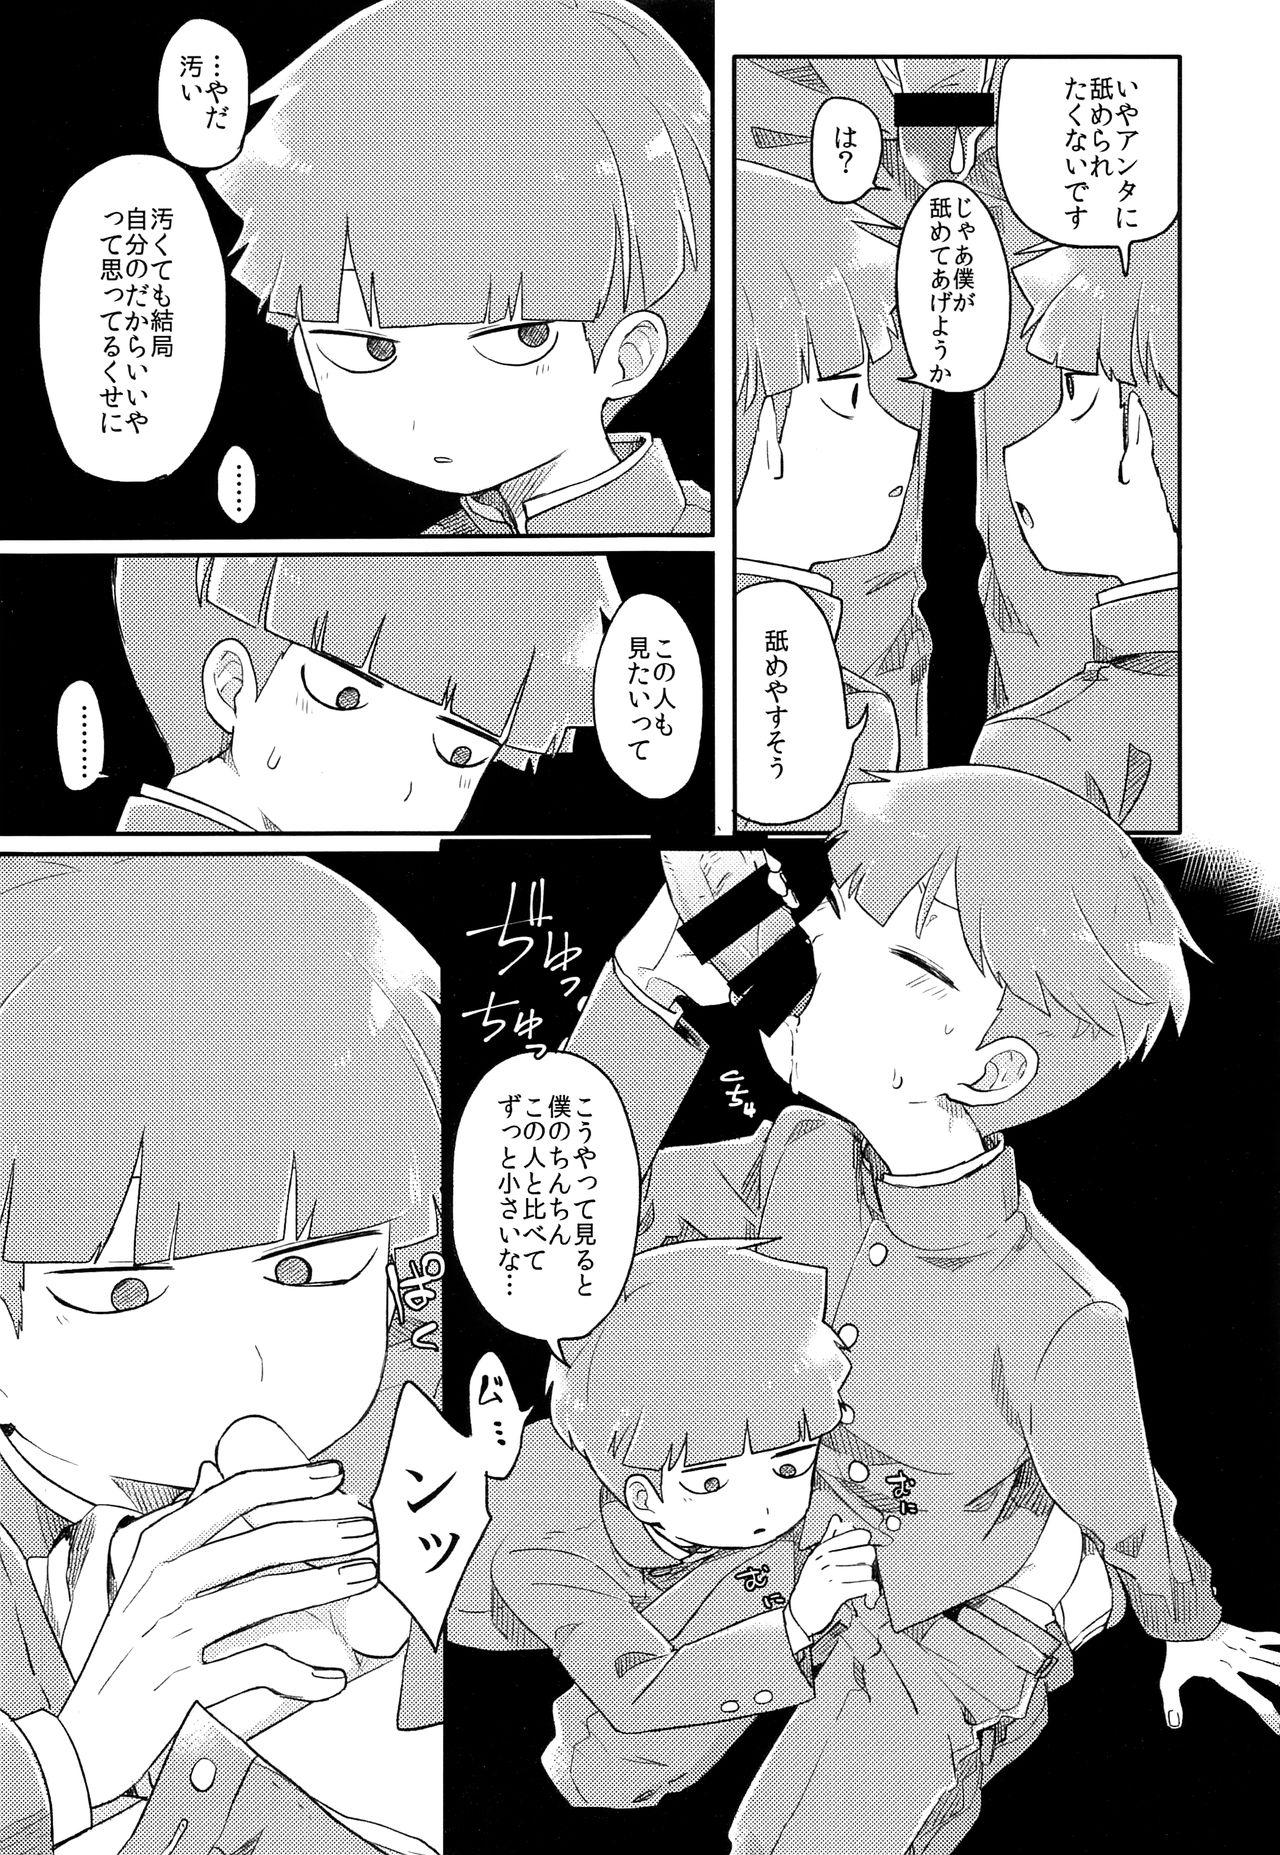 Tease Dare? - Mob psycho 100 Hot - Page 11